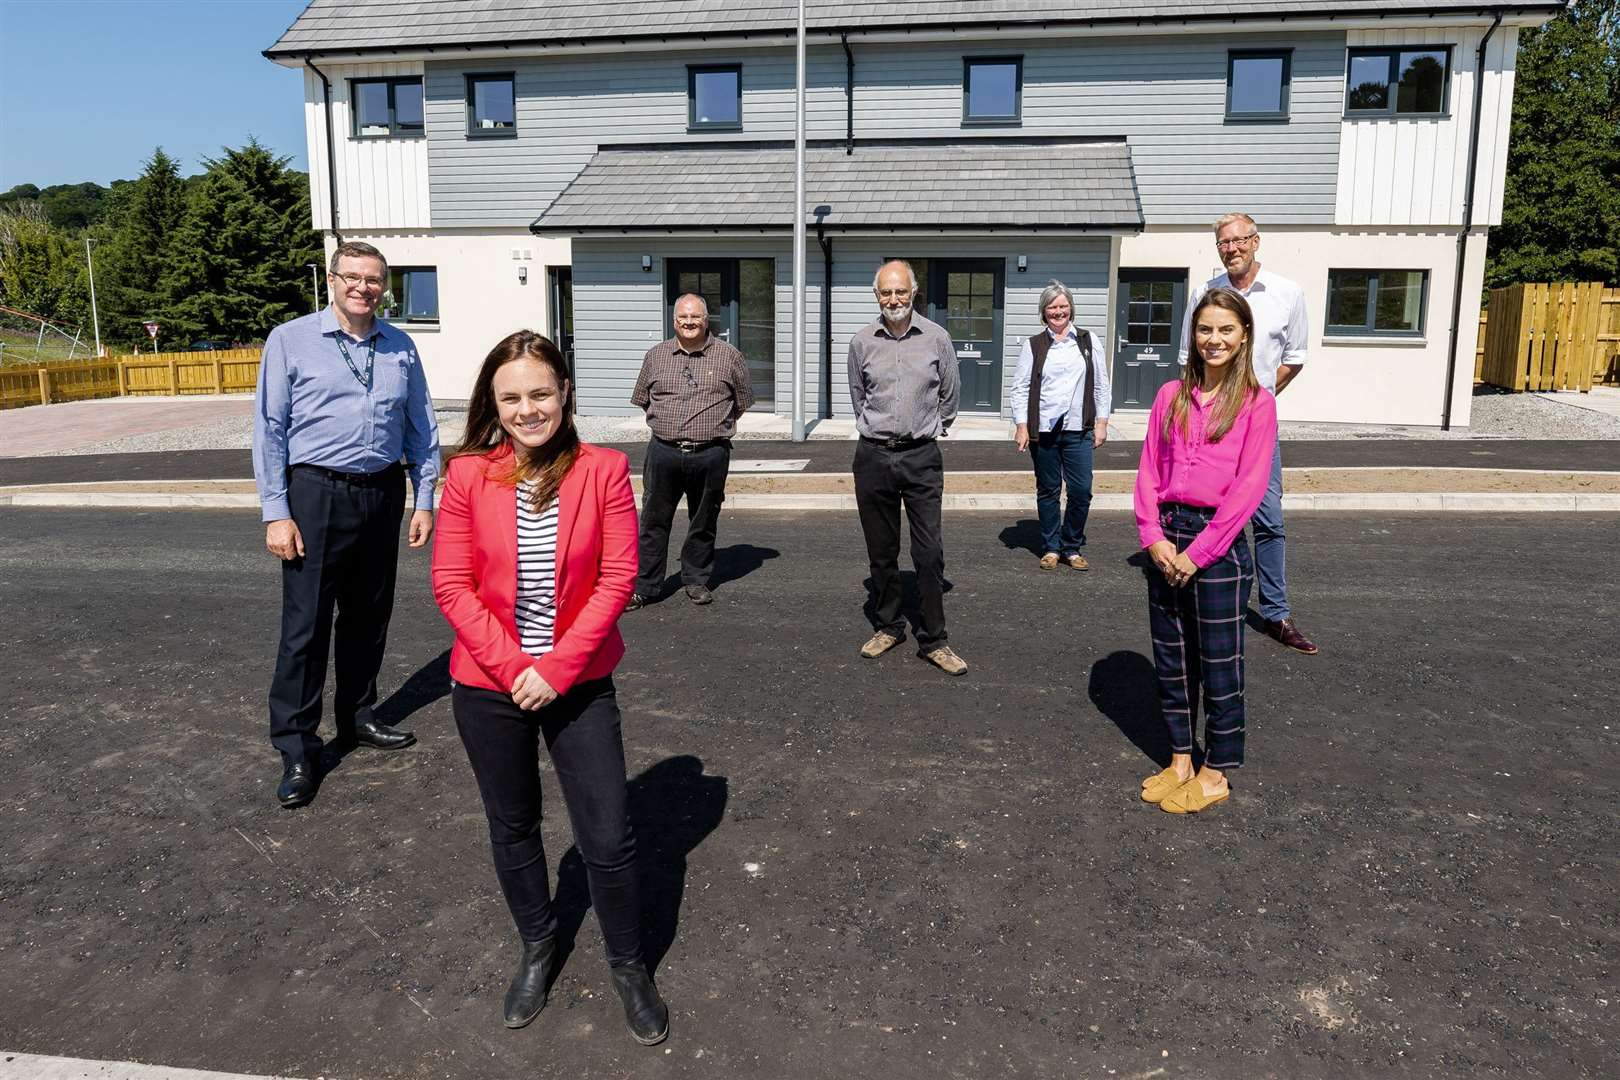 Pictured from left are Jason MacGilp, chief executive of Cairn, Kate Forbes MSP, Simon Campbell, property investment manager at Cairn, John McHardy, housing development manager at Highland Council, Rhona Donnelly, senior quantity surveyor at WGC (Scotland), Dougal Murray, managing director at WGC (Scotland) and Claire Dolan, development officer at HHA.